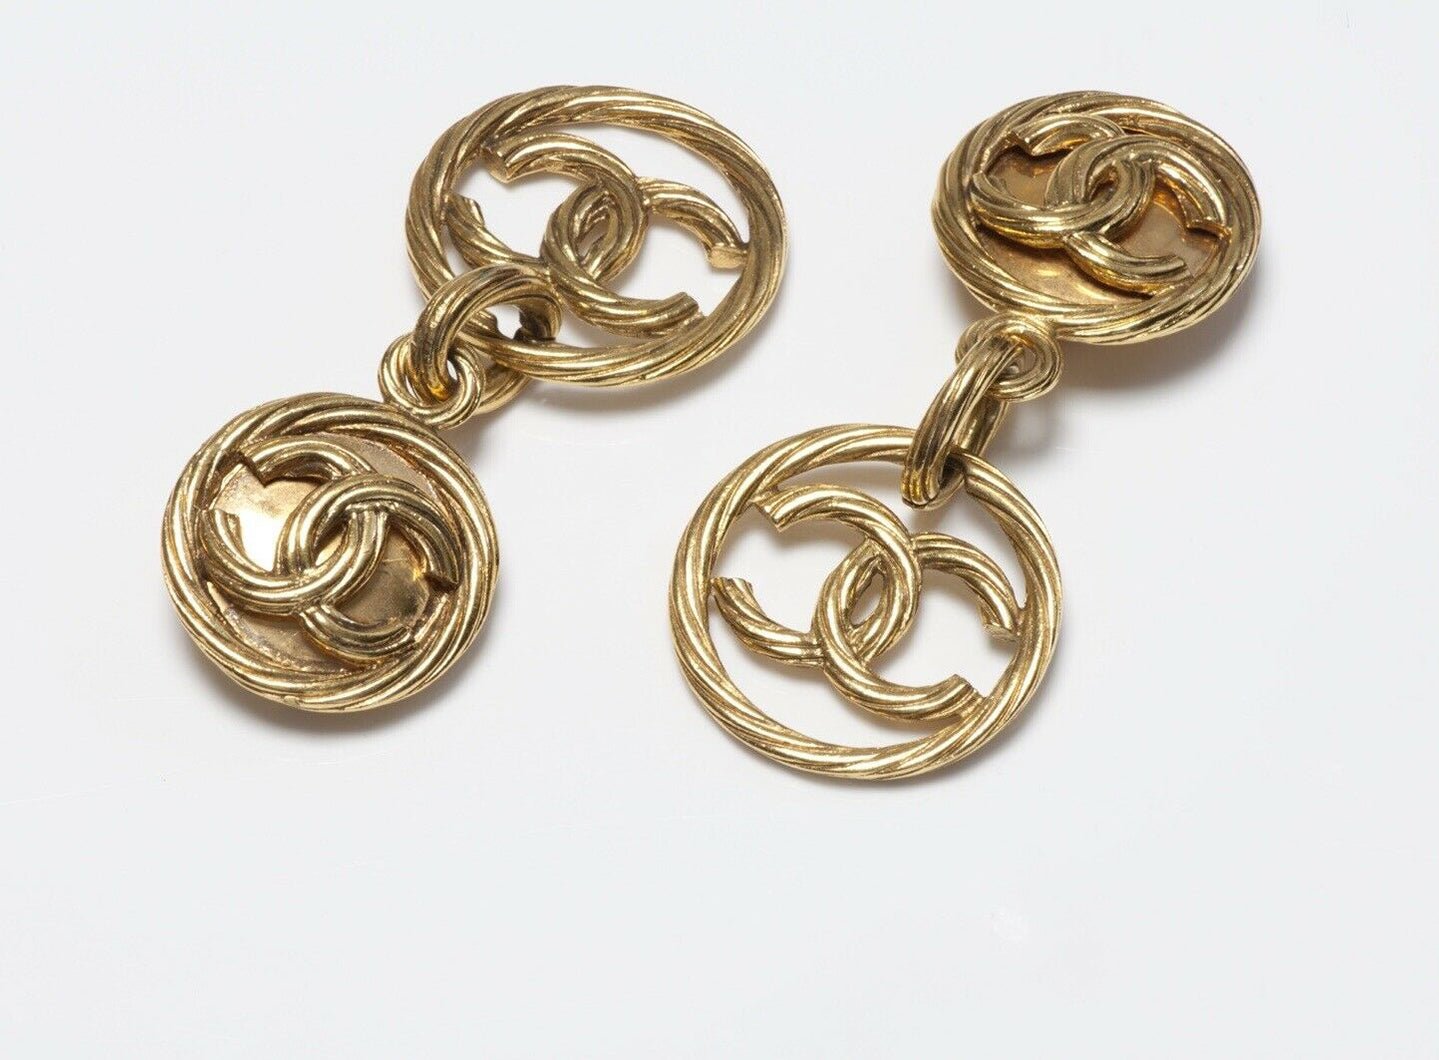 CHANEL Paris Spring 1993 Long Gold Plated CC Logo Earrings - DSF Antique Jewelry